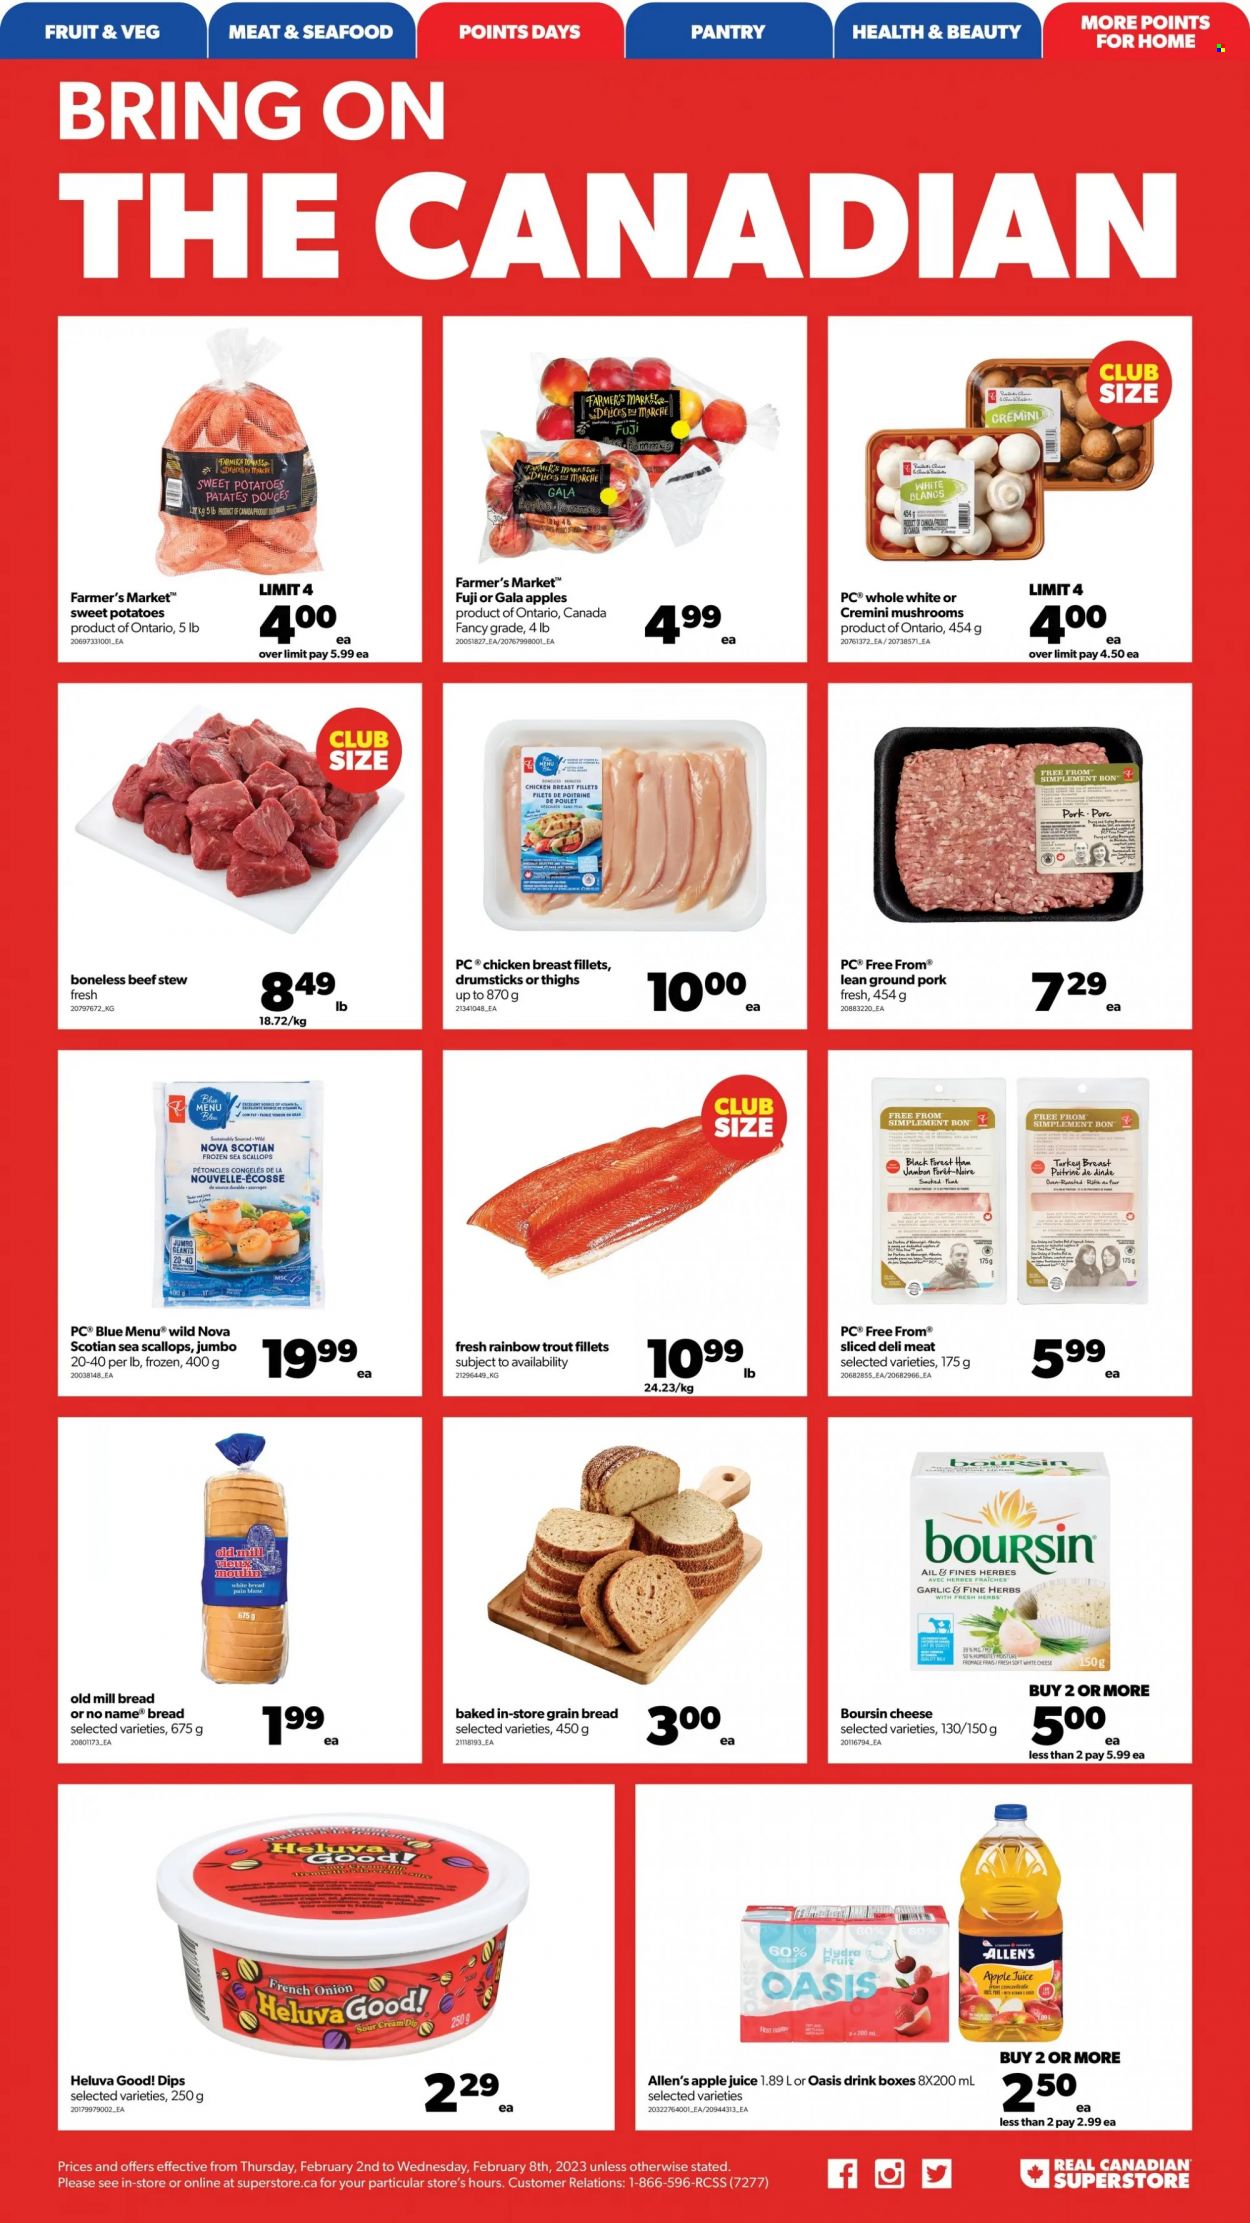 Real Canadian Superstore flyer  - February 02, 2023 - February 08, 2023.